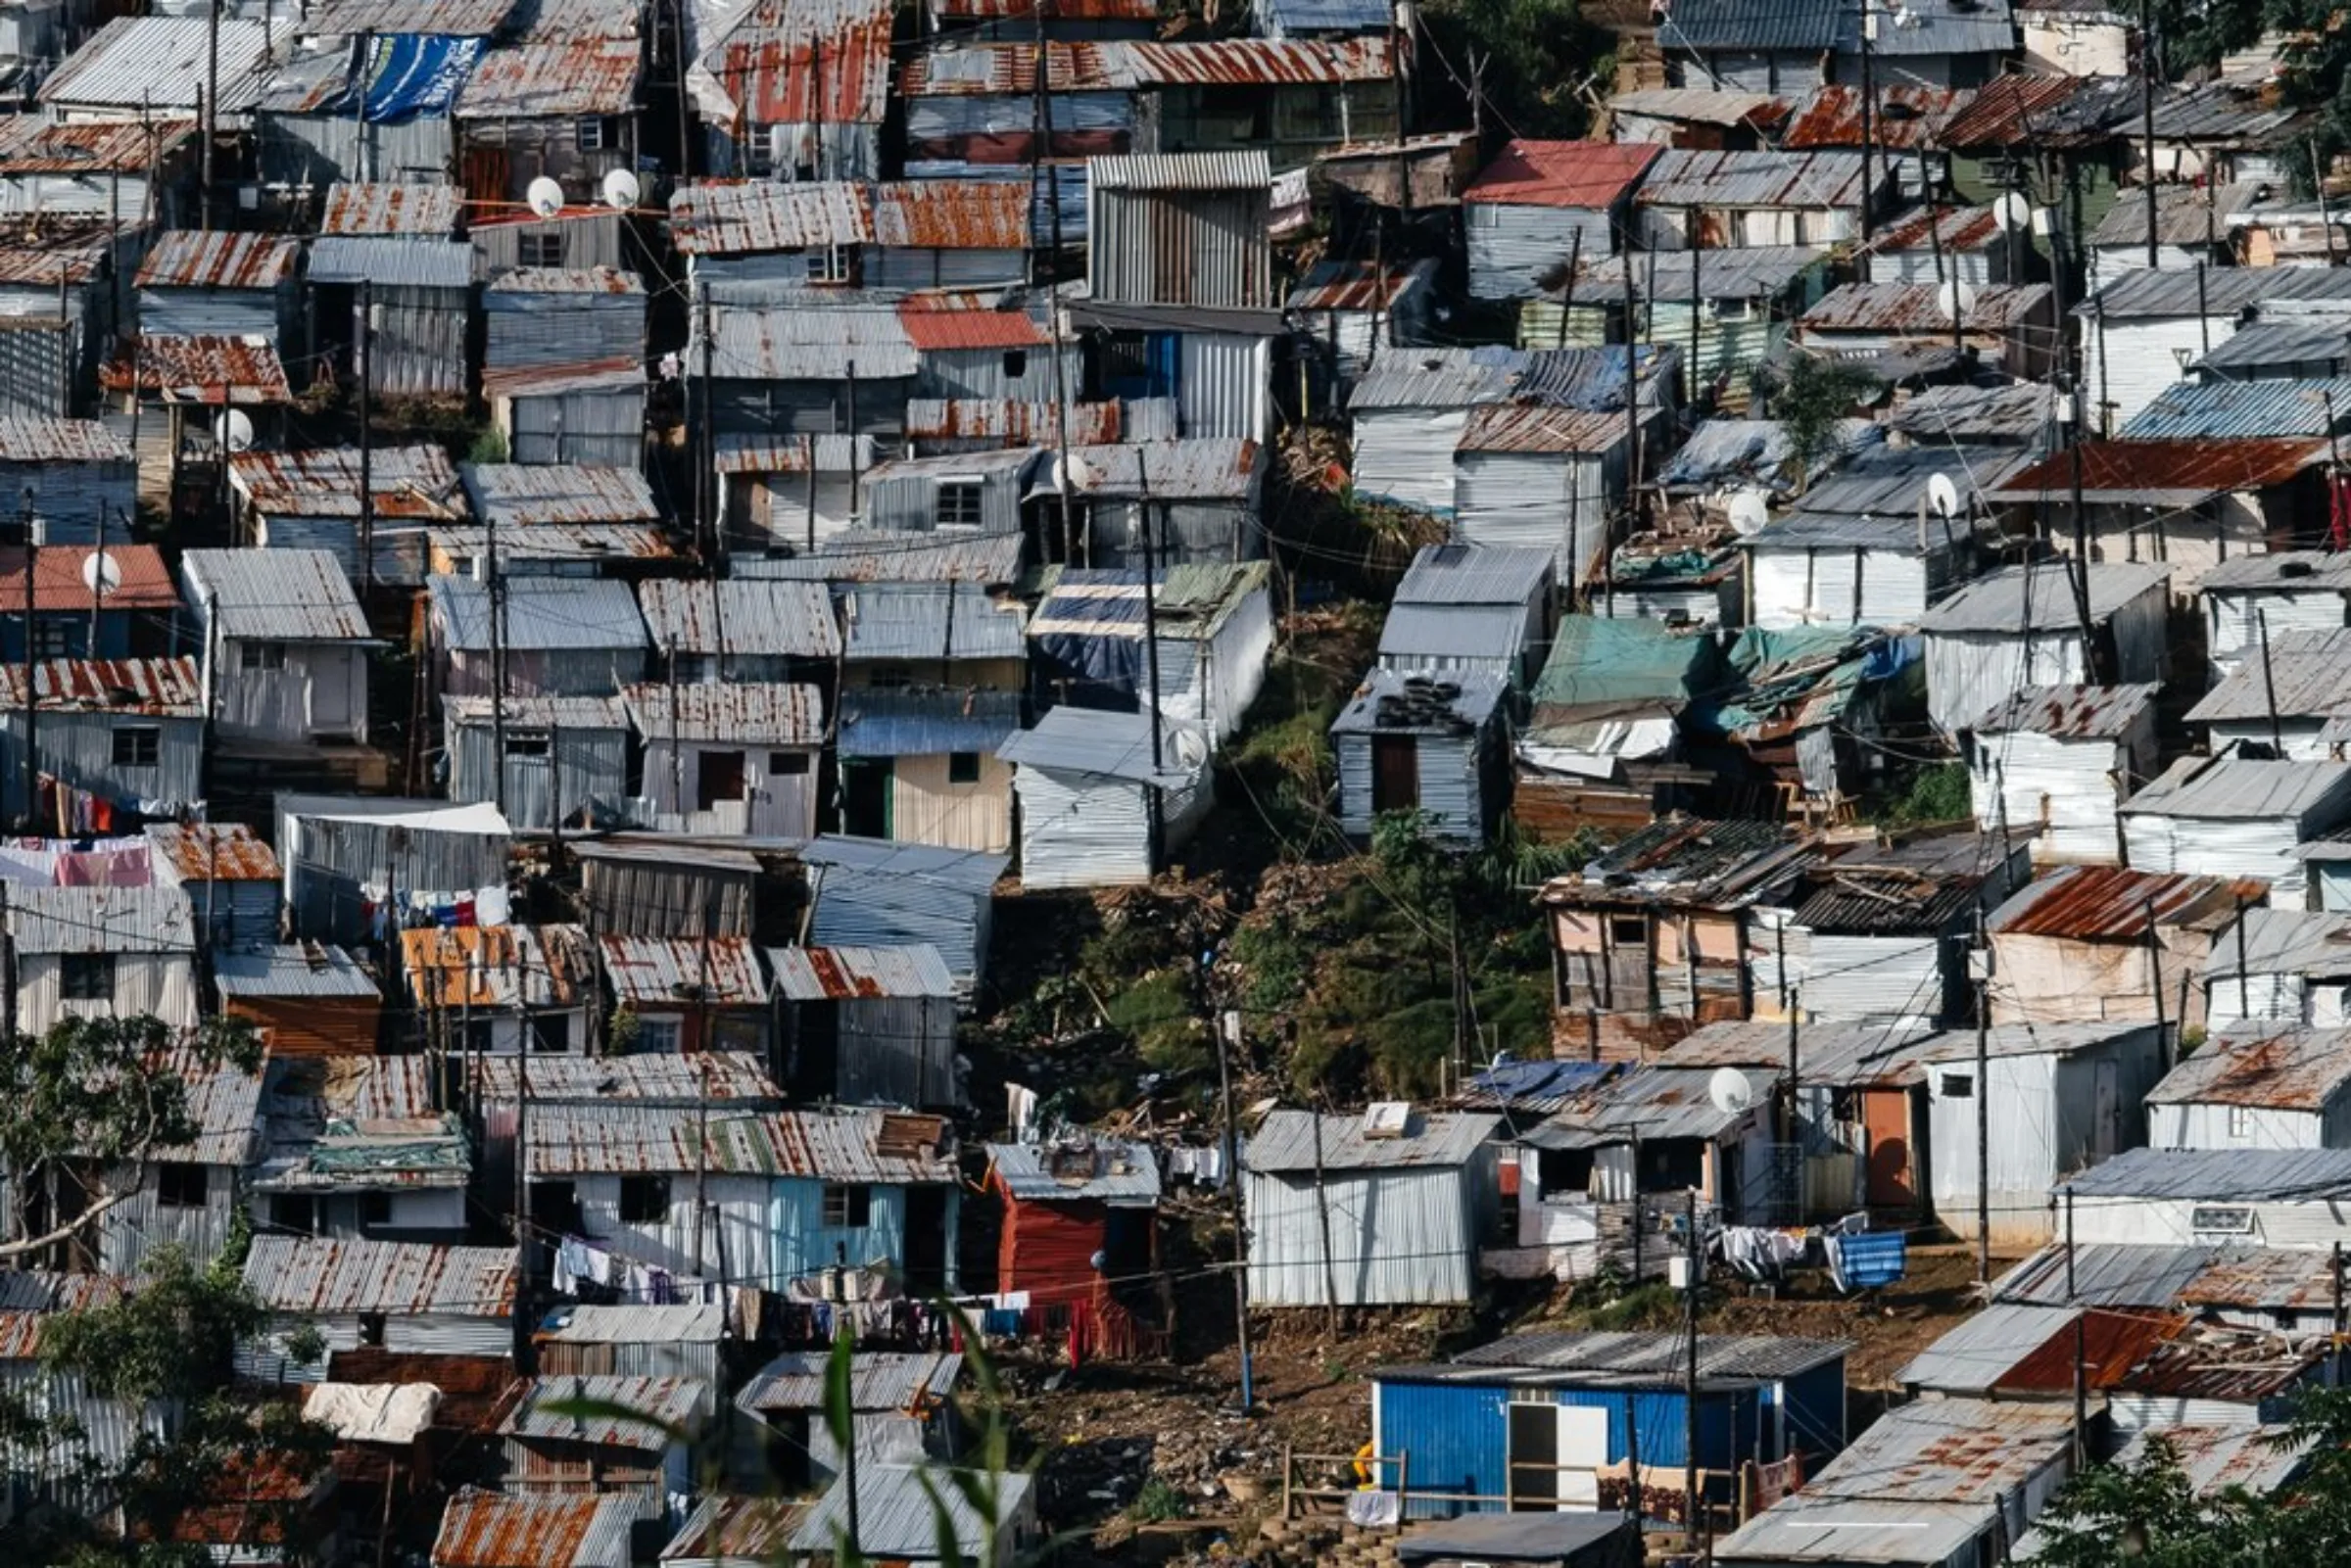 Densely packed shacks cover a steep hillslope at the Foreman Road informal settlement in Durban, South Africa, March 30, 2021. High population densities and a severe shortage of adequate housing and land has seen informal settlements established on spaces dangerous to inhabit, such as the steep slopes that characterise much of the city